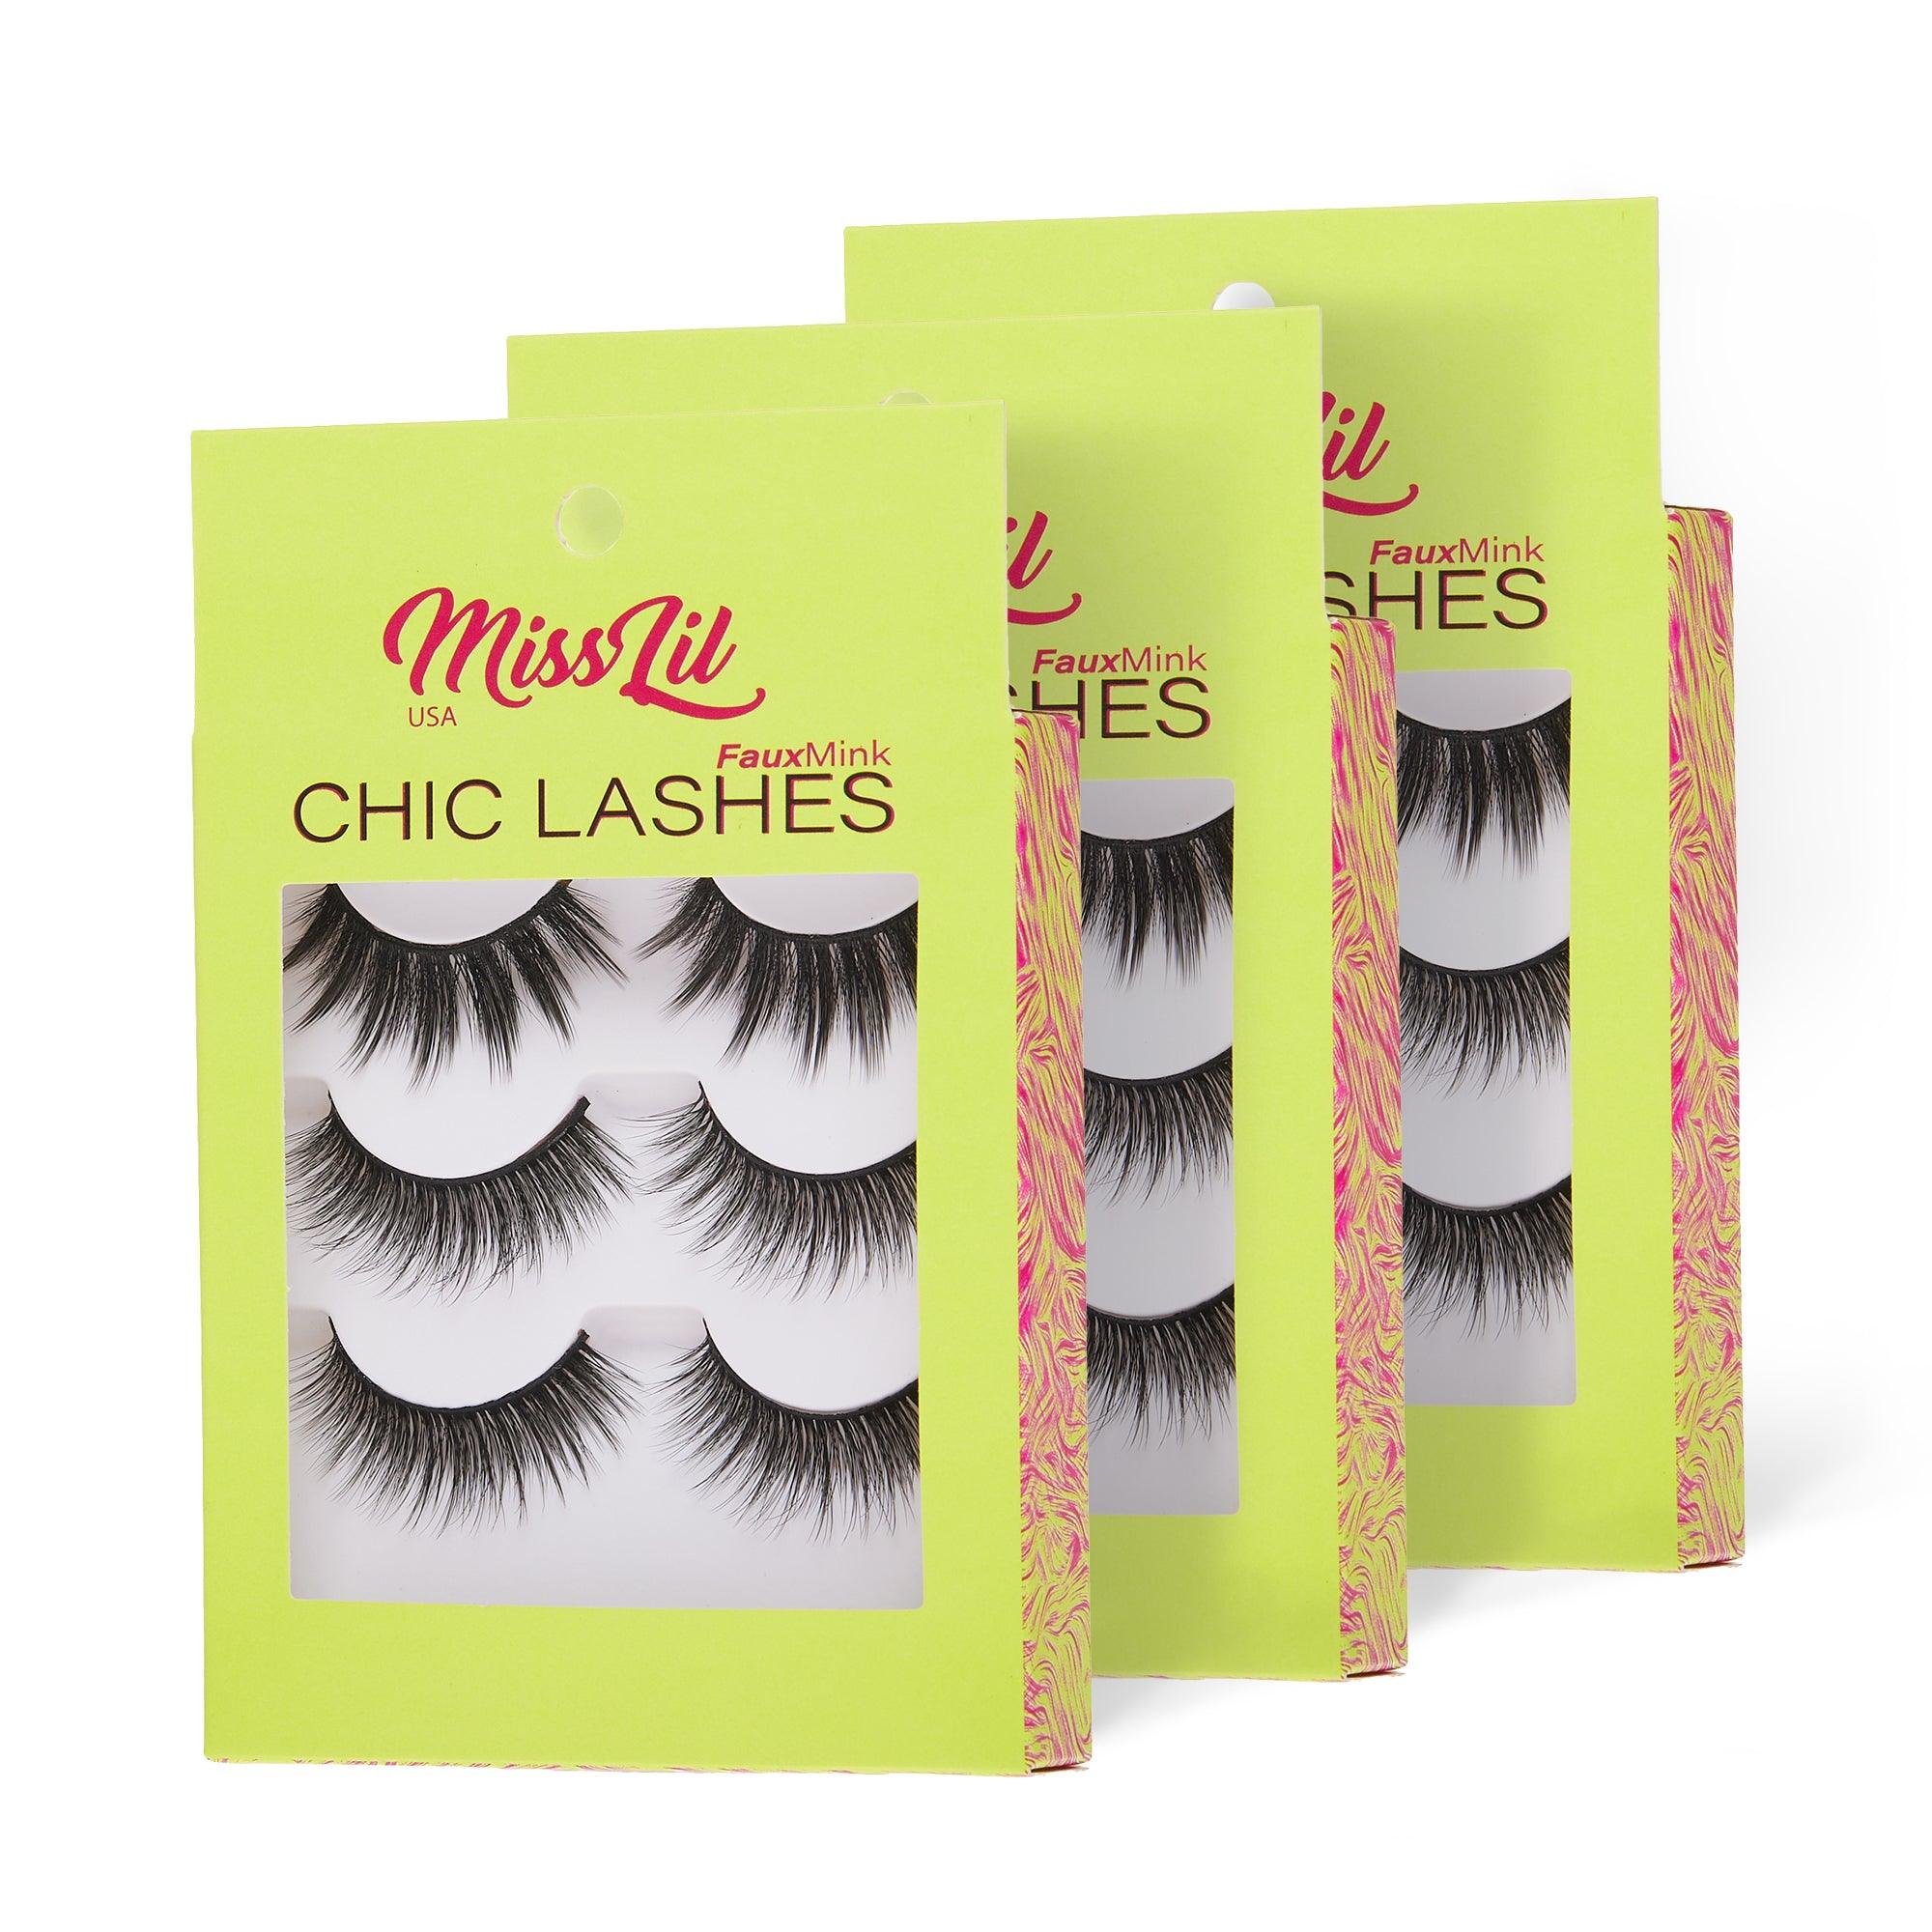 3-Pair Faux Mink Eyelashes - Chic Lashes Collection #33 - Pack of 3 - Miss Lil USA